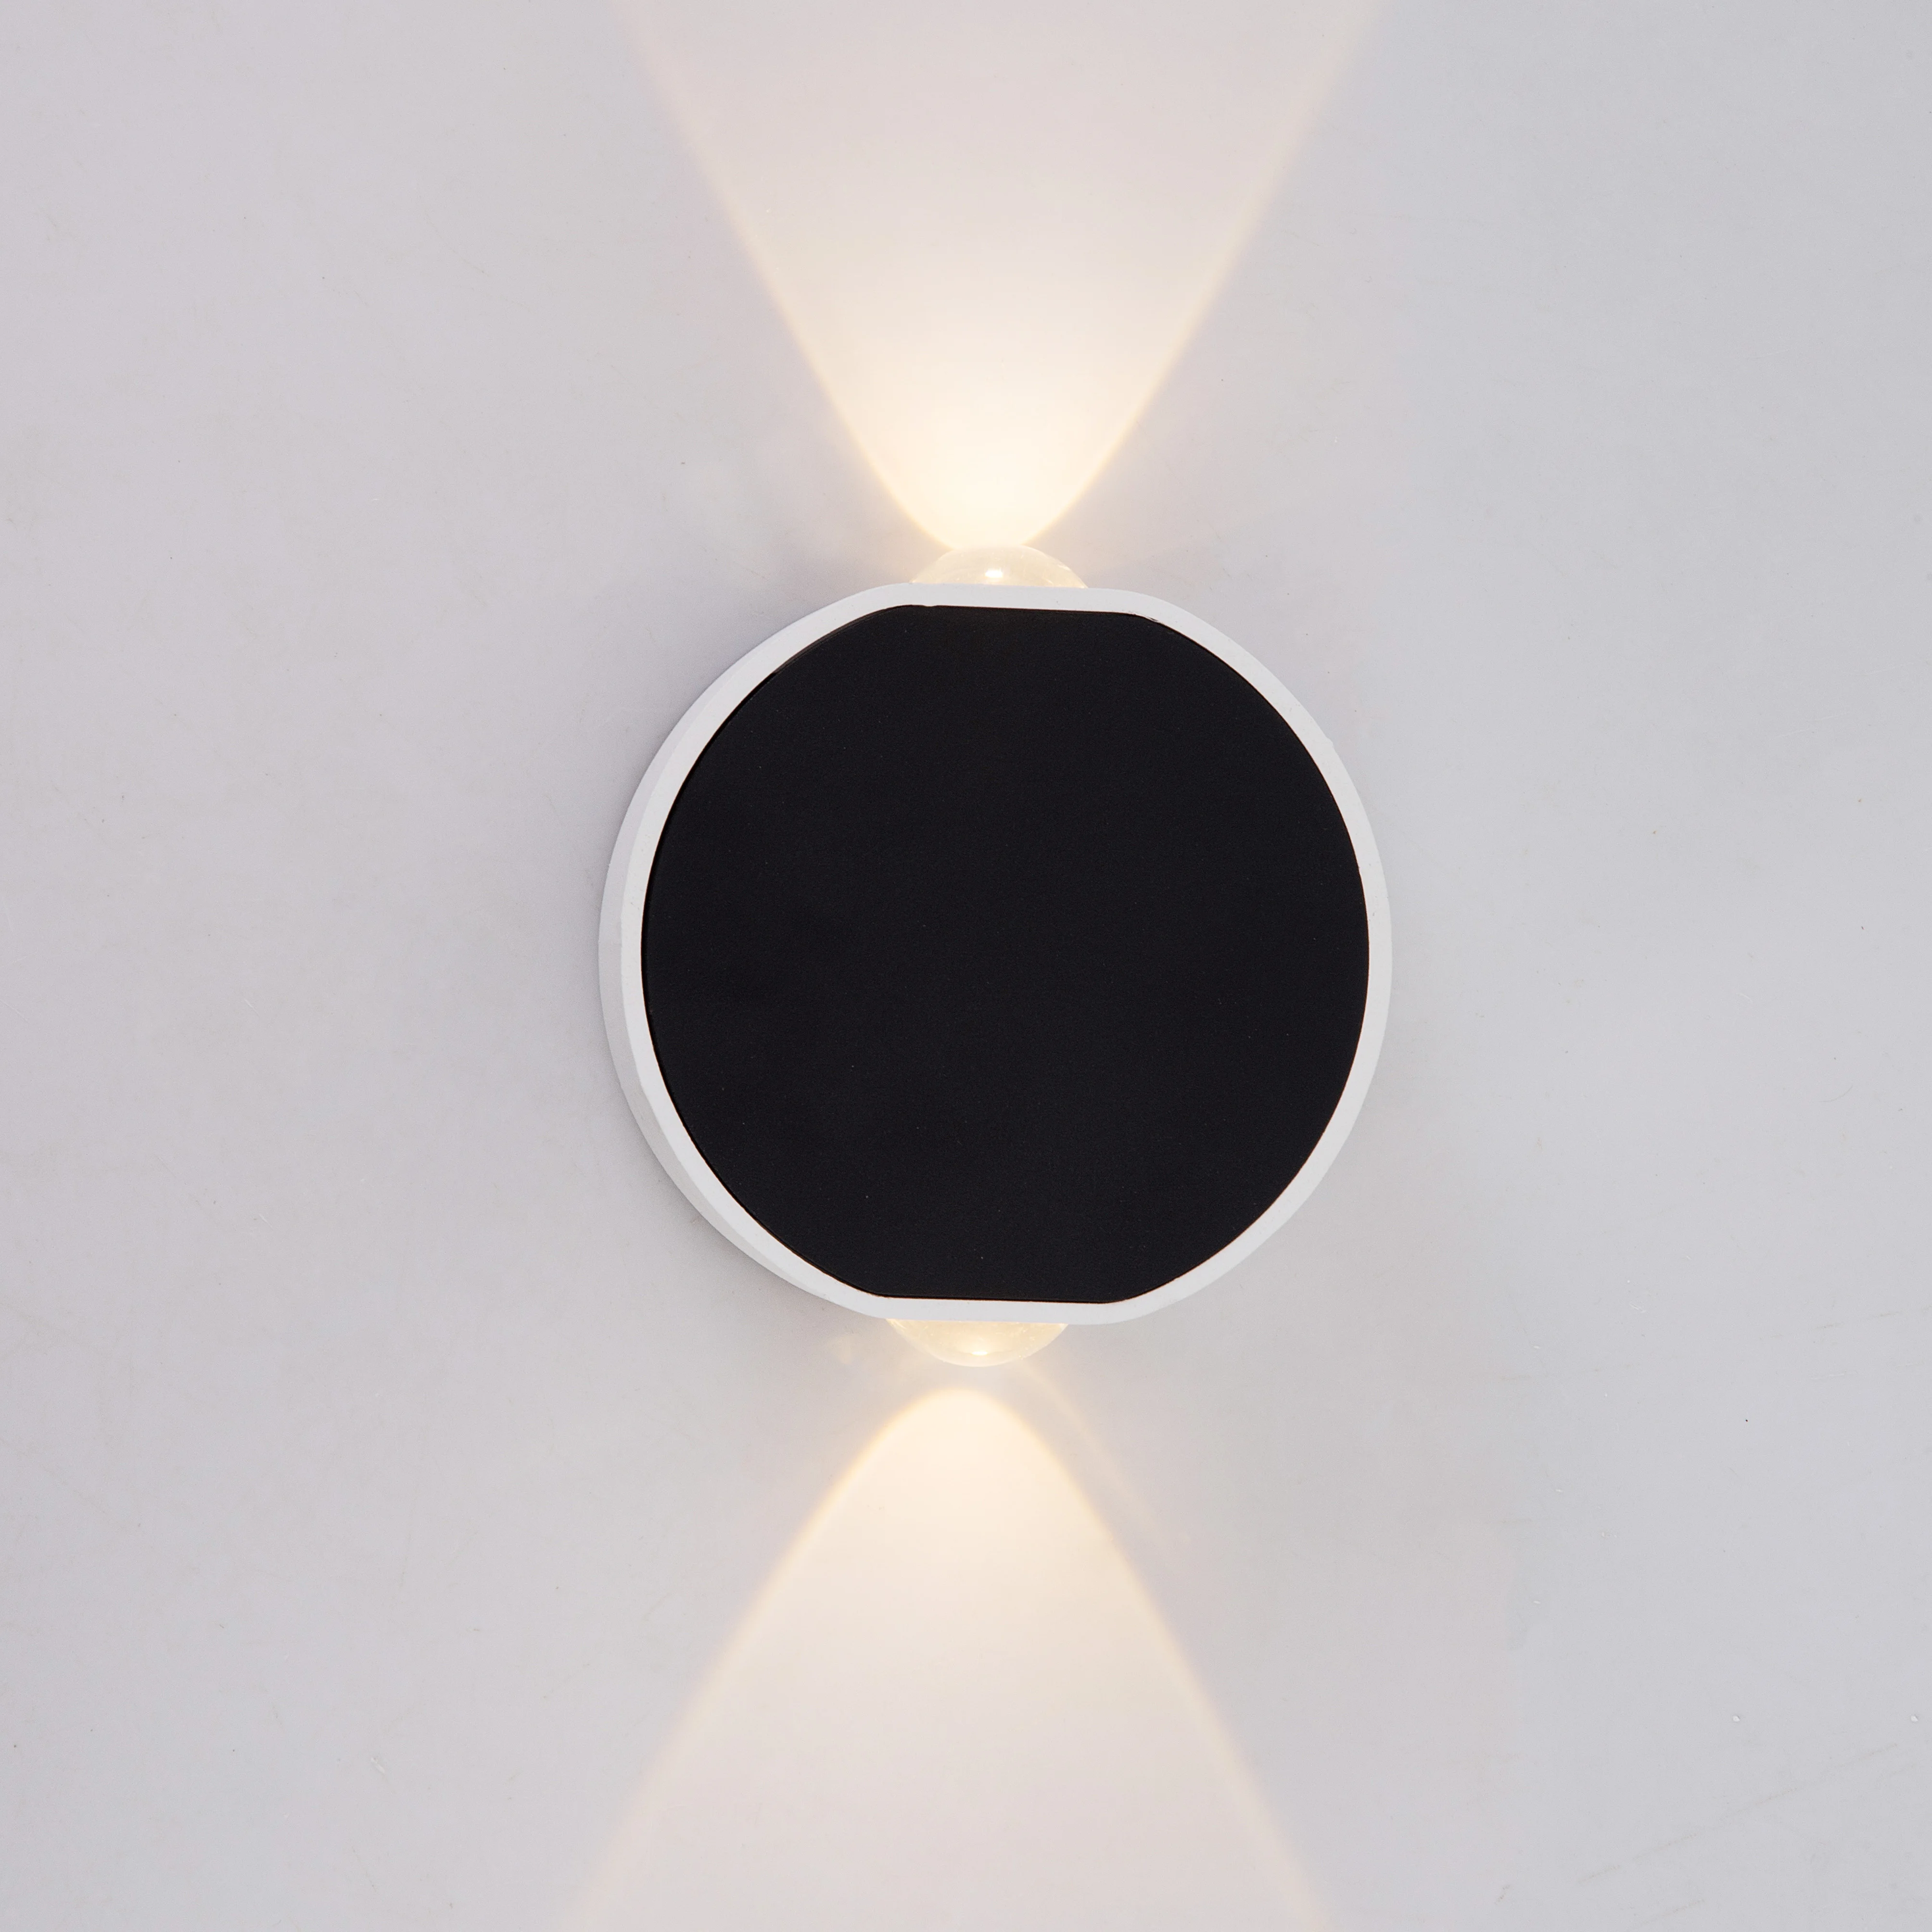 Round up and down spotlight  2X1.5W modern indoor corridor staircase light picture light black and white aluminum wall lamp